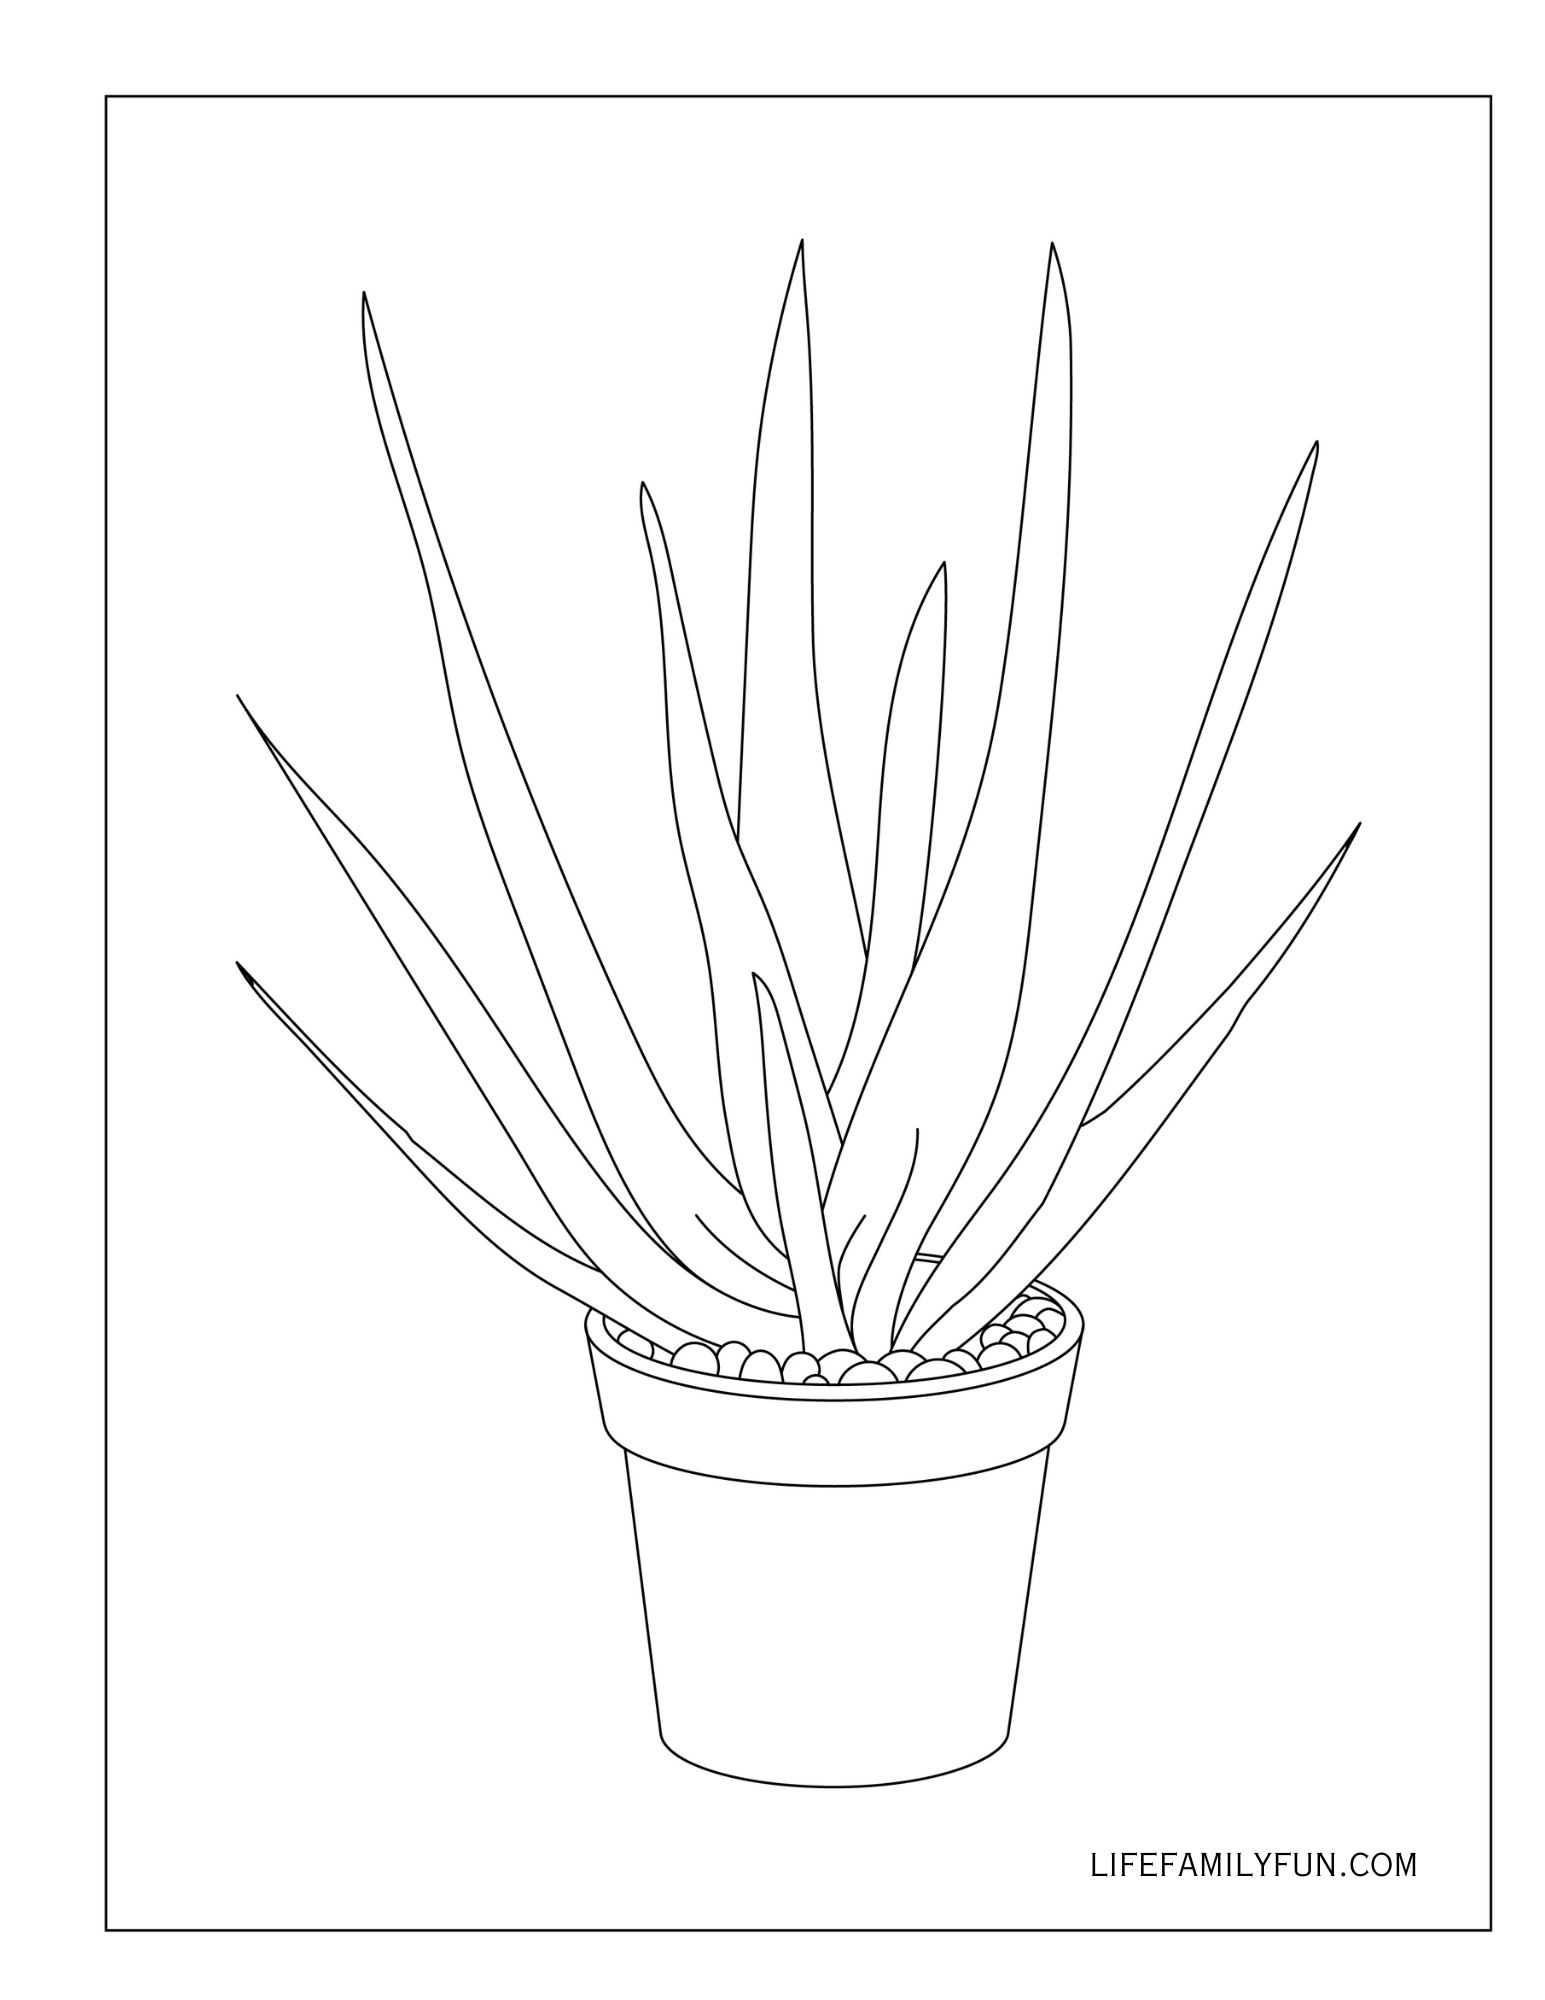 Simple Black and white Coloring Page